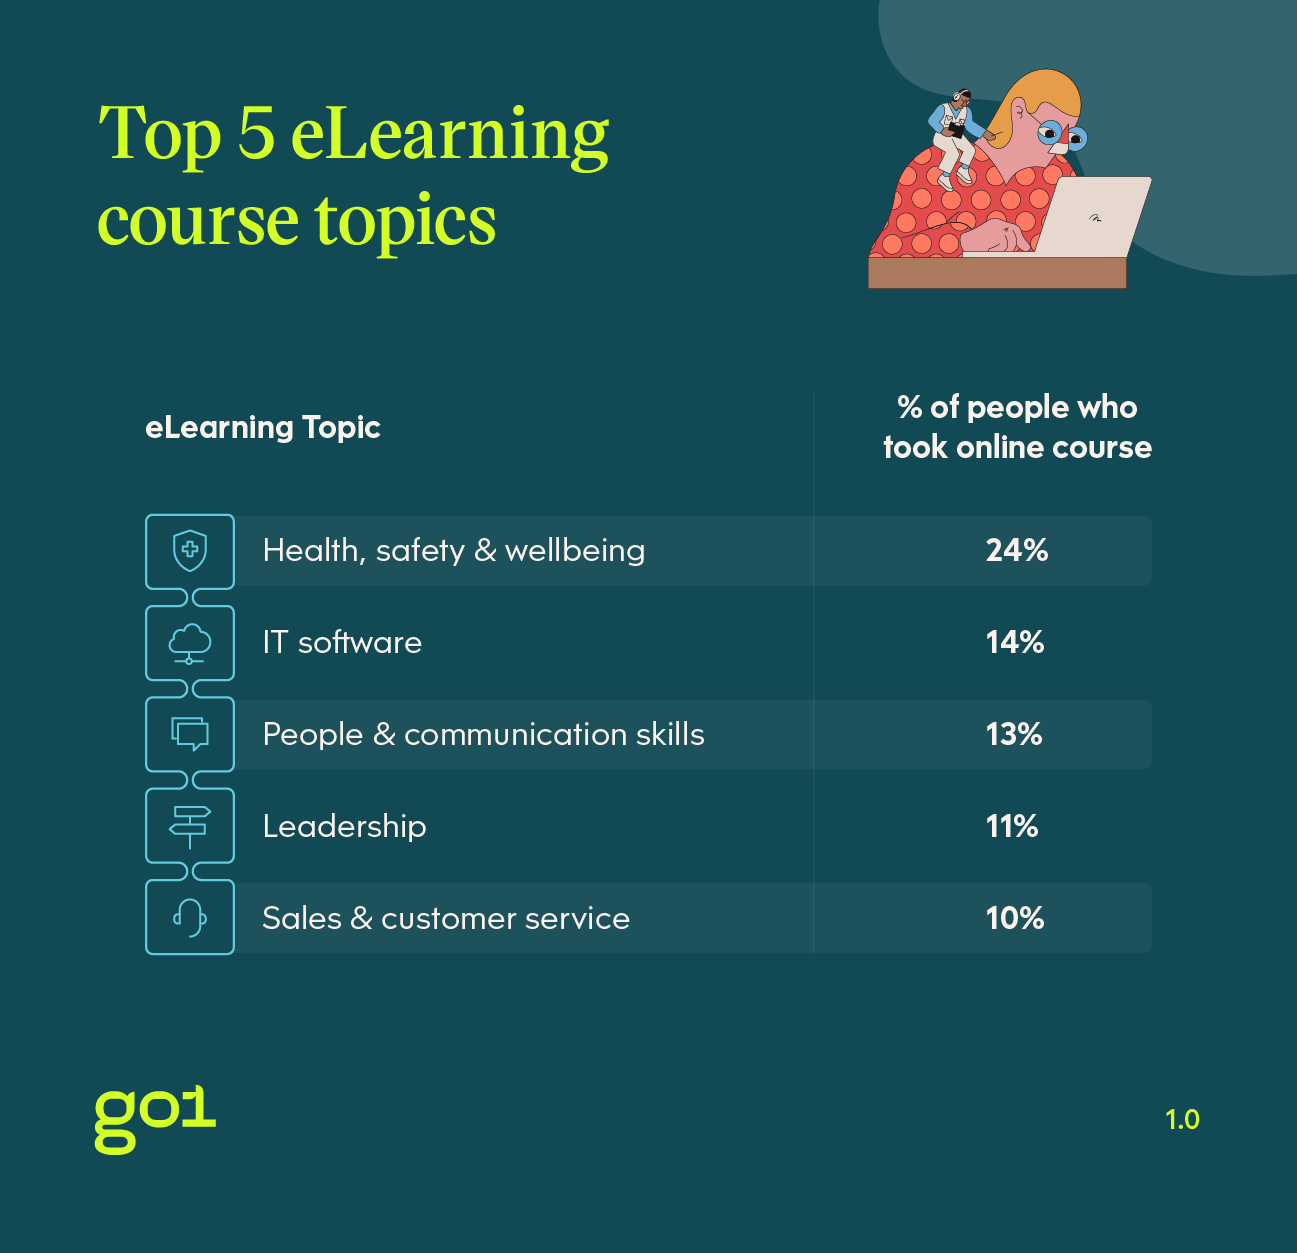 Survey data. The Top 5 eLearning courses. Health, safety, & wellbeing 24%, IT Software 14%, People & communication skills 13%, Leadership 11%, Sales & customer service 10%